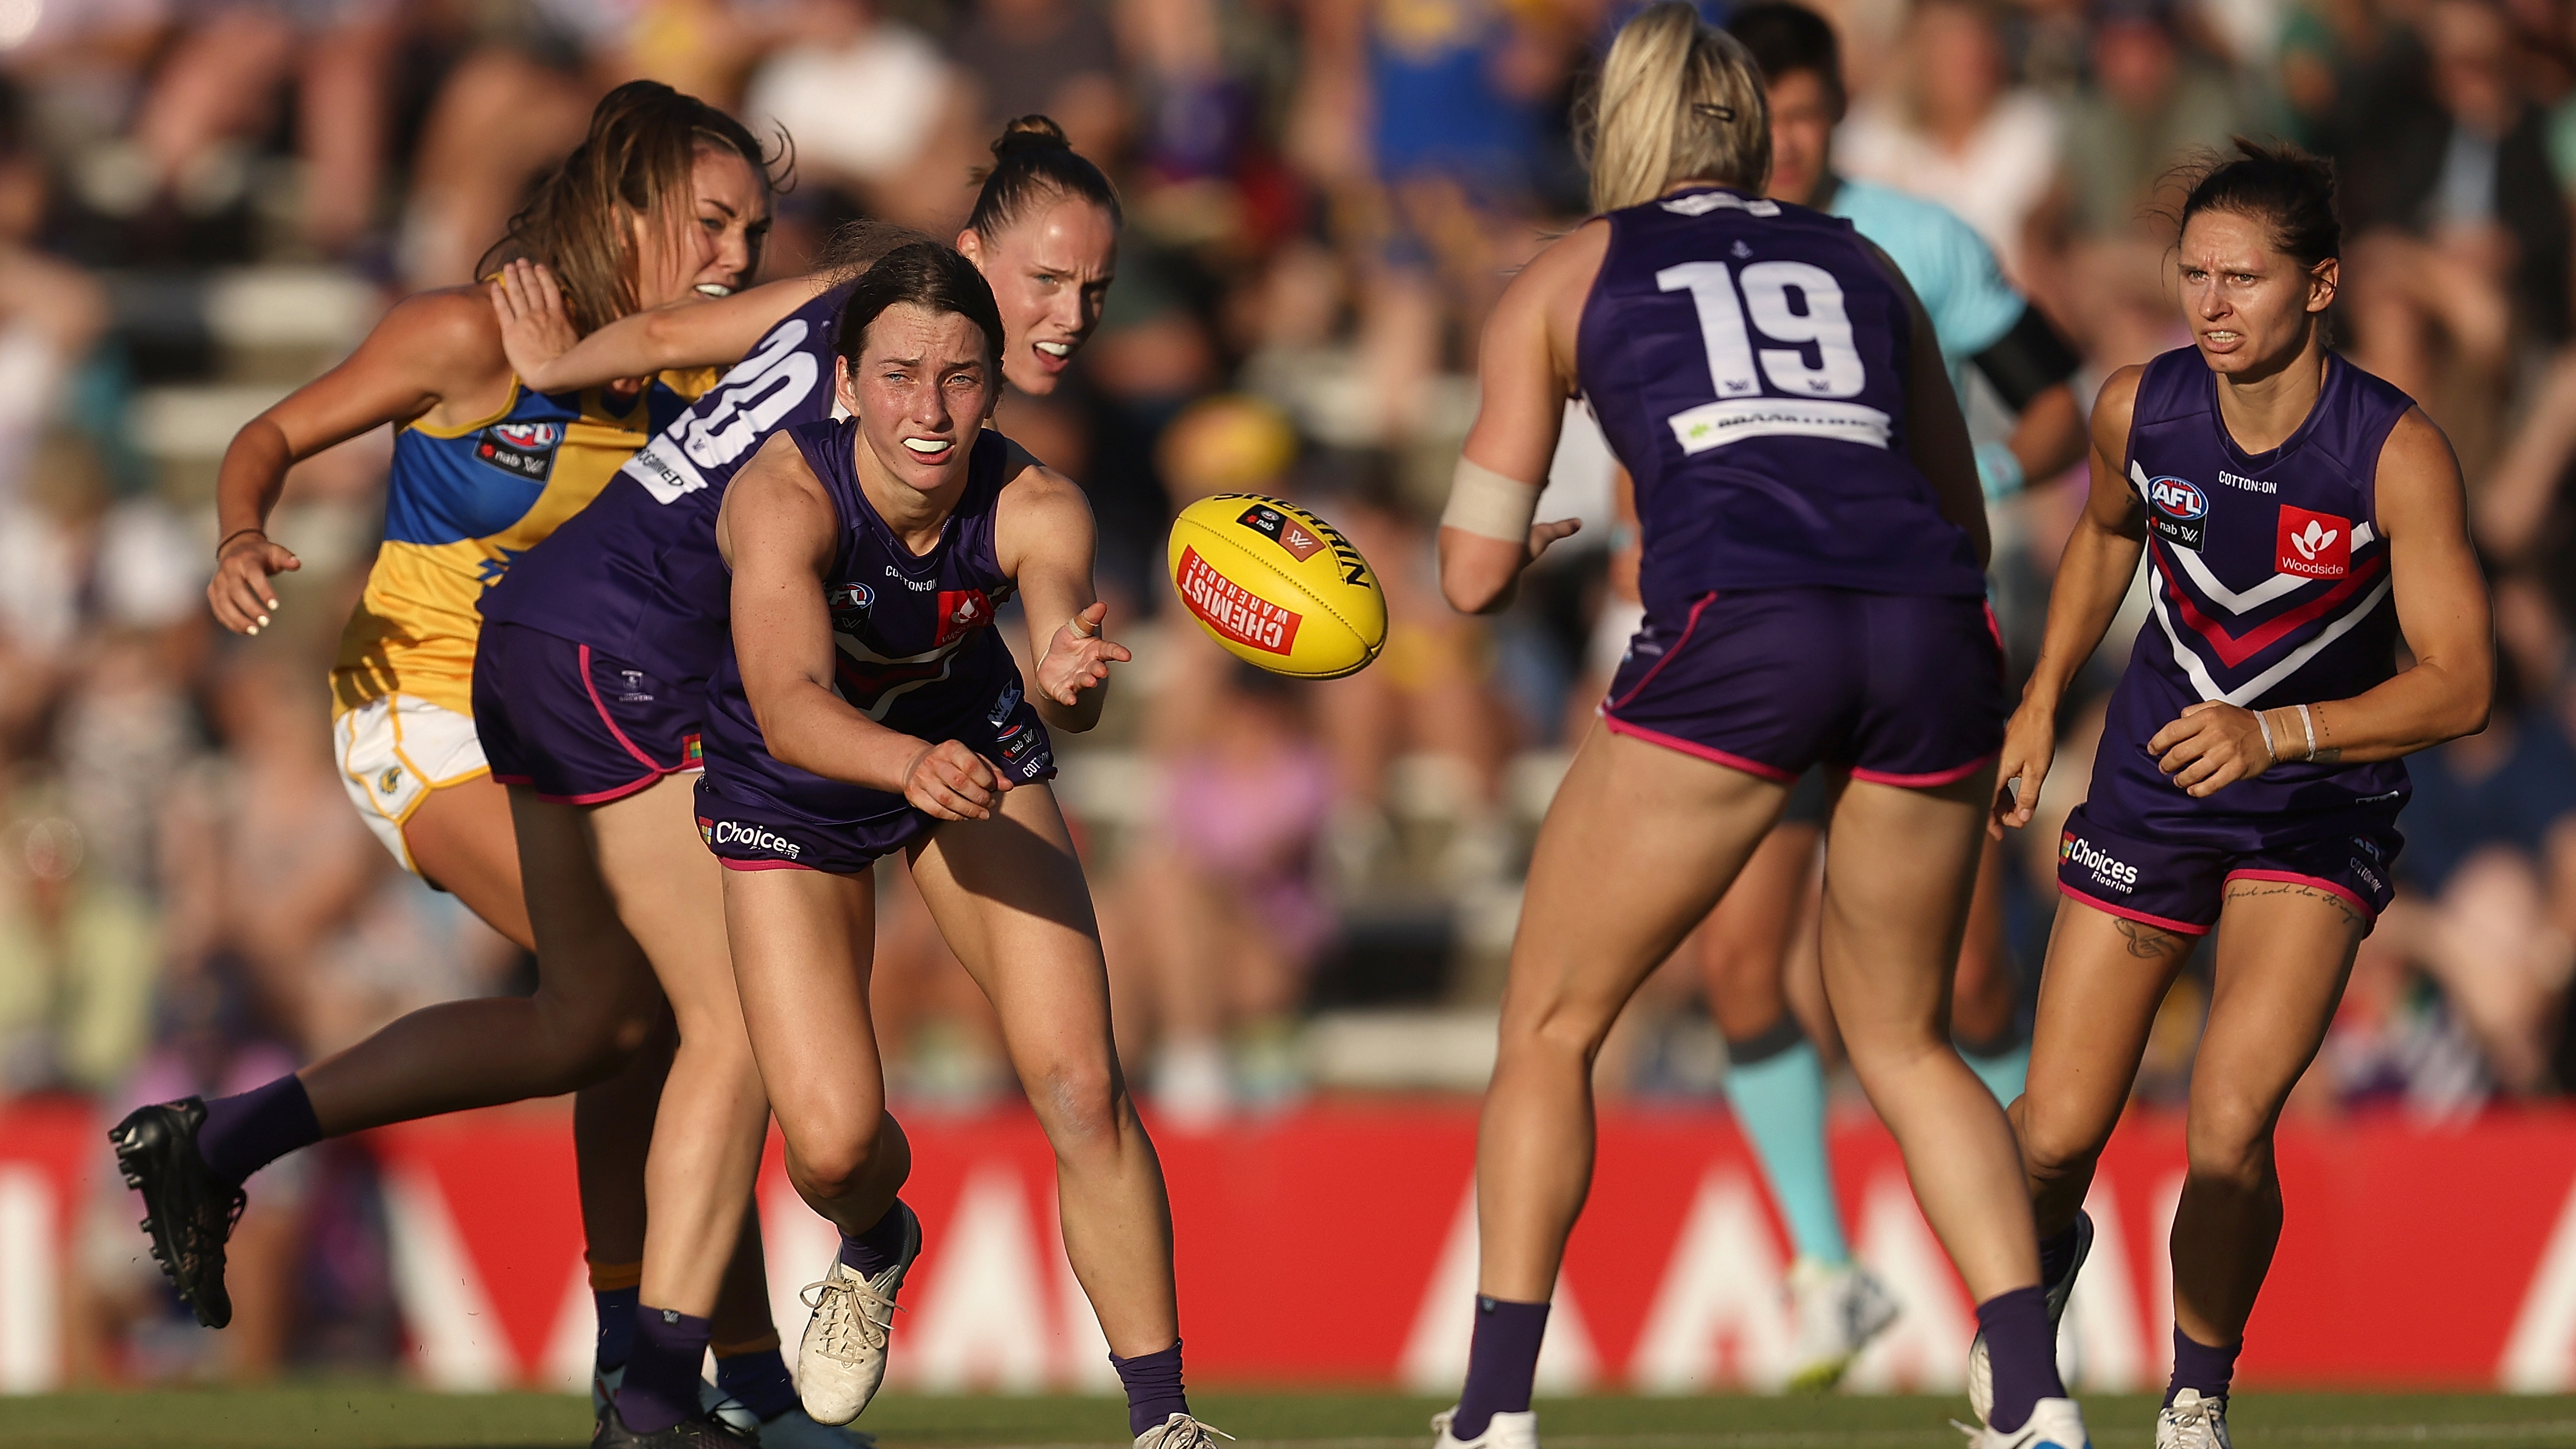 Jessica Low of the Dockers in action during the round one AFLW match between the Fremantle Dockers and the West Coast Eagles at Fremantle Oval.